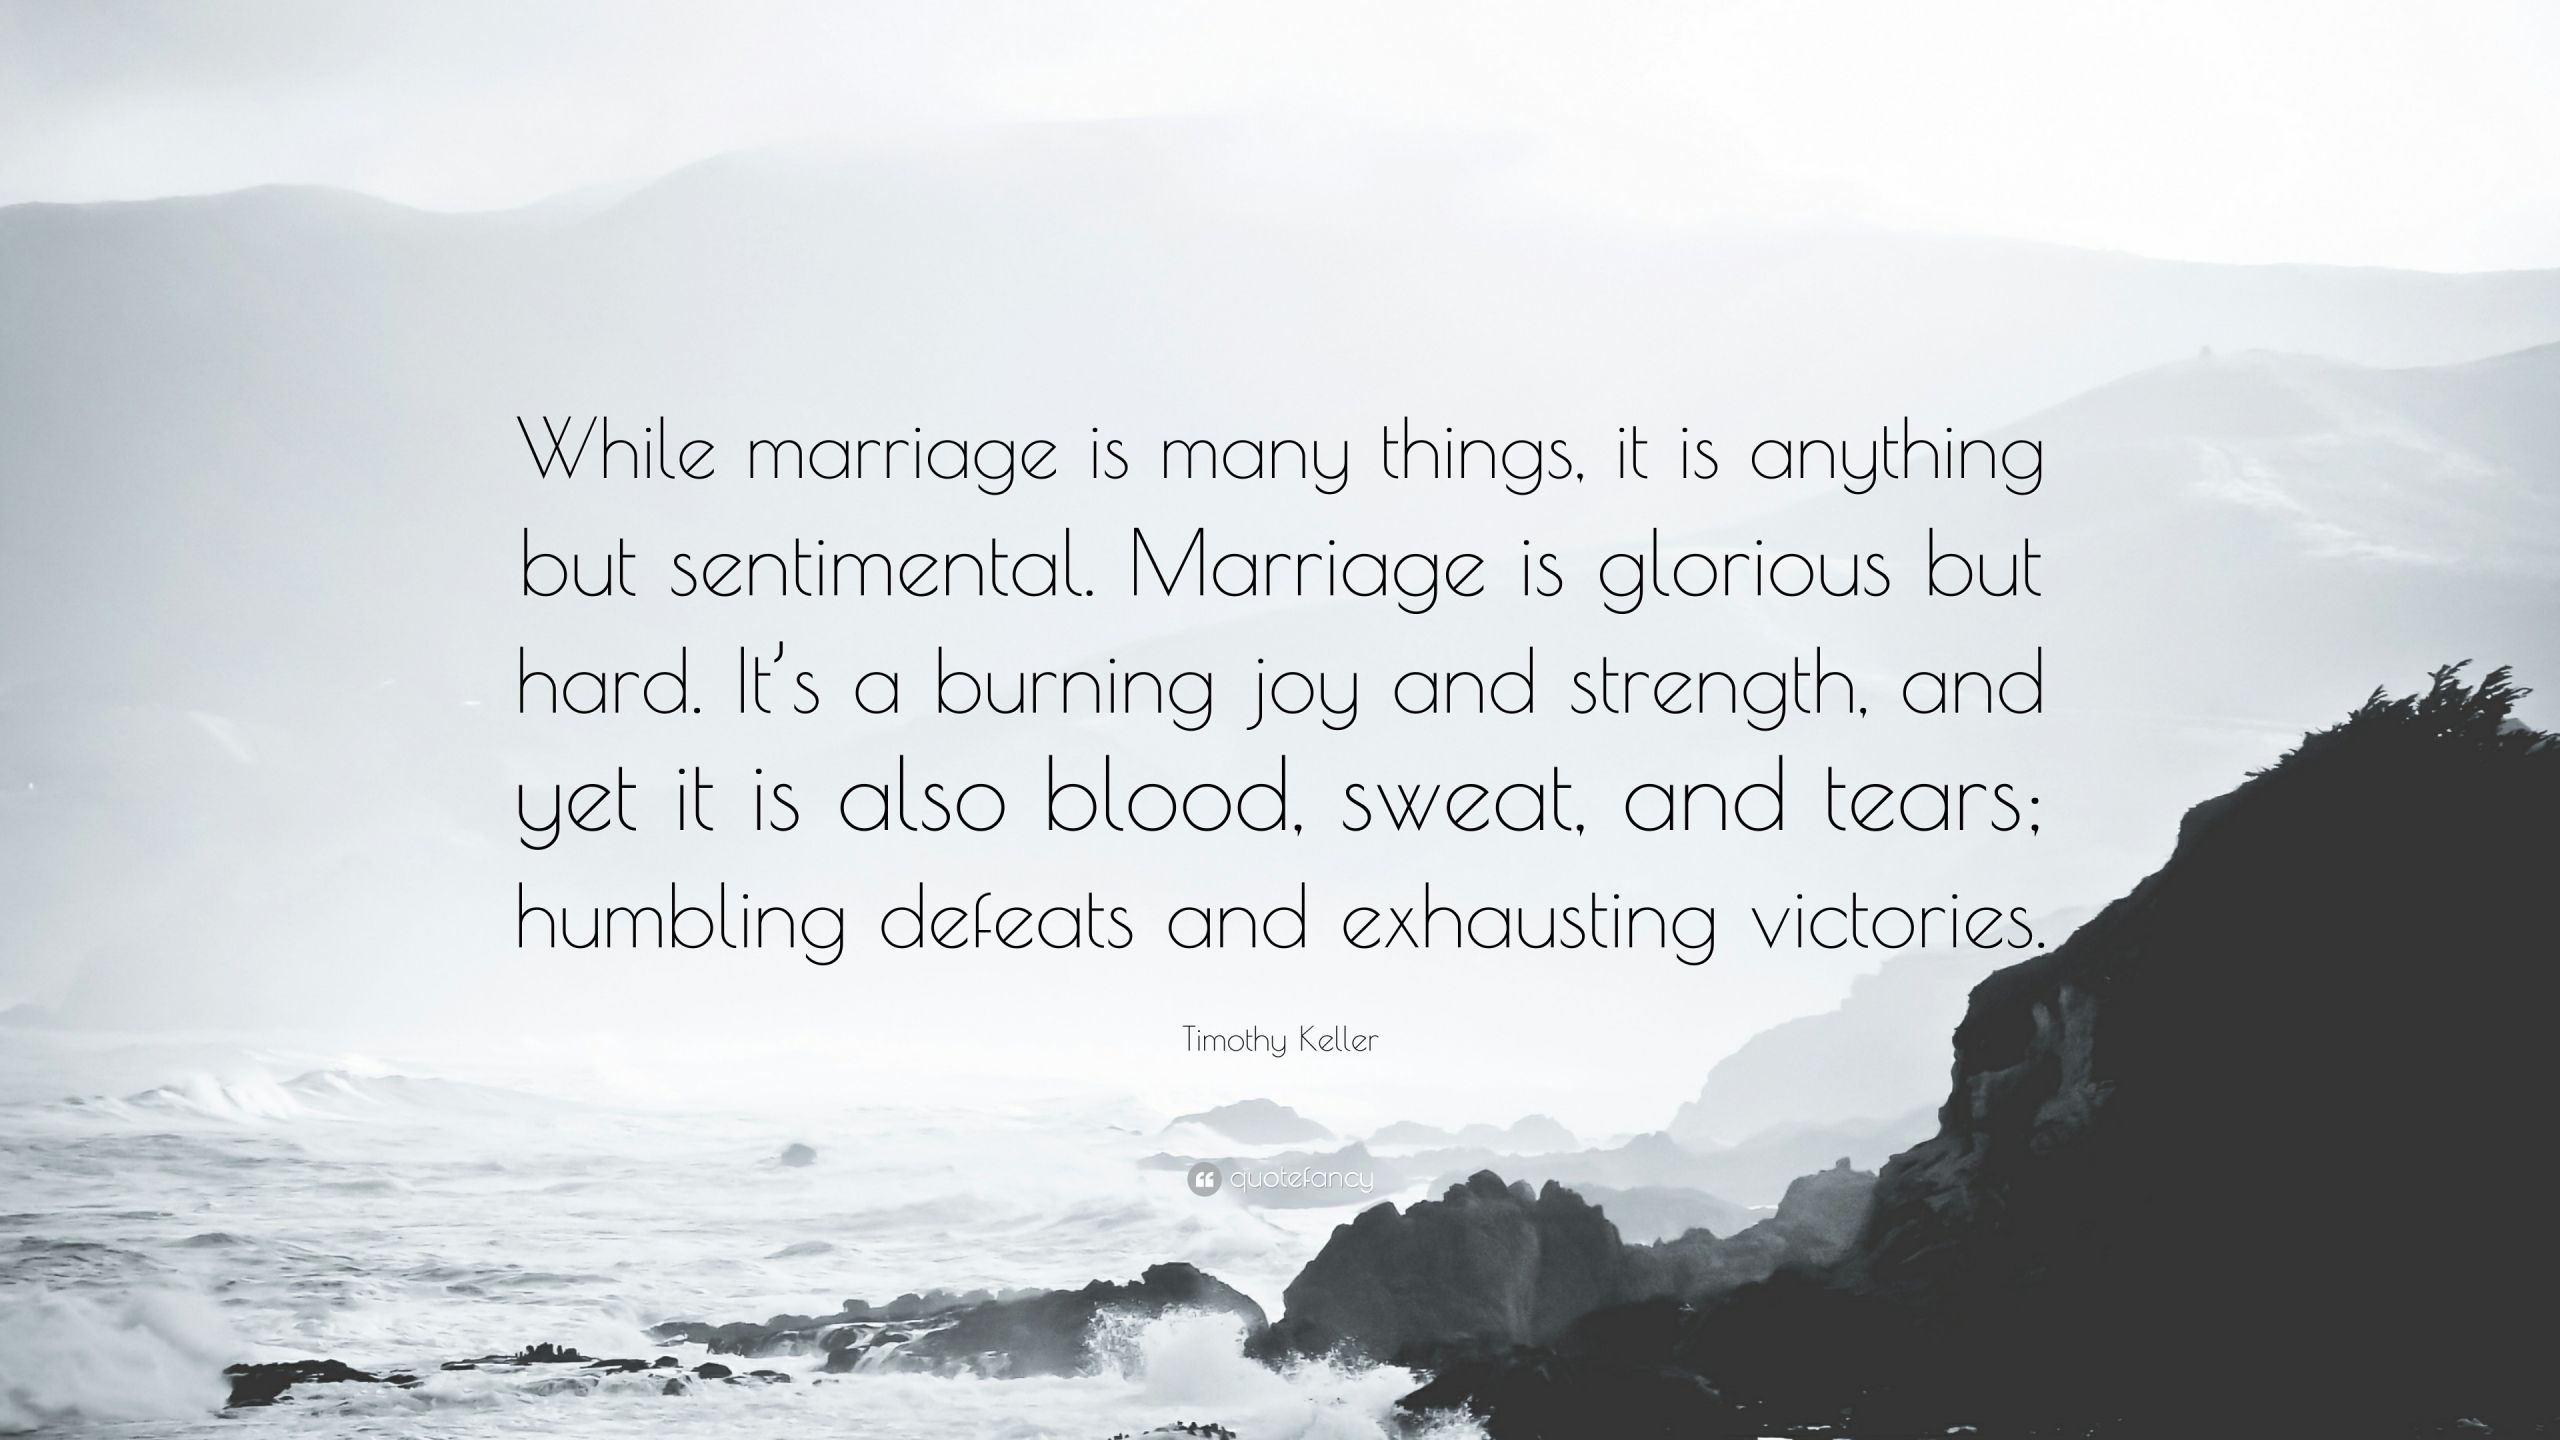 Tim Keller Marriage Quotes
 Timothy Keller Quote “While marriage is many things it